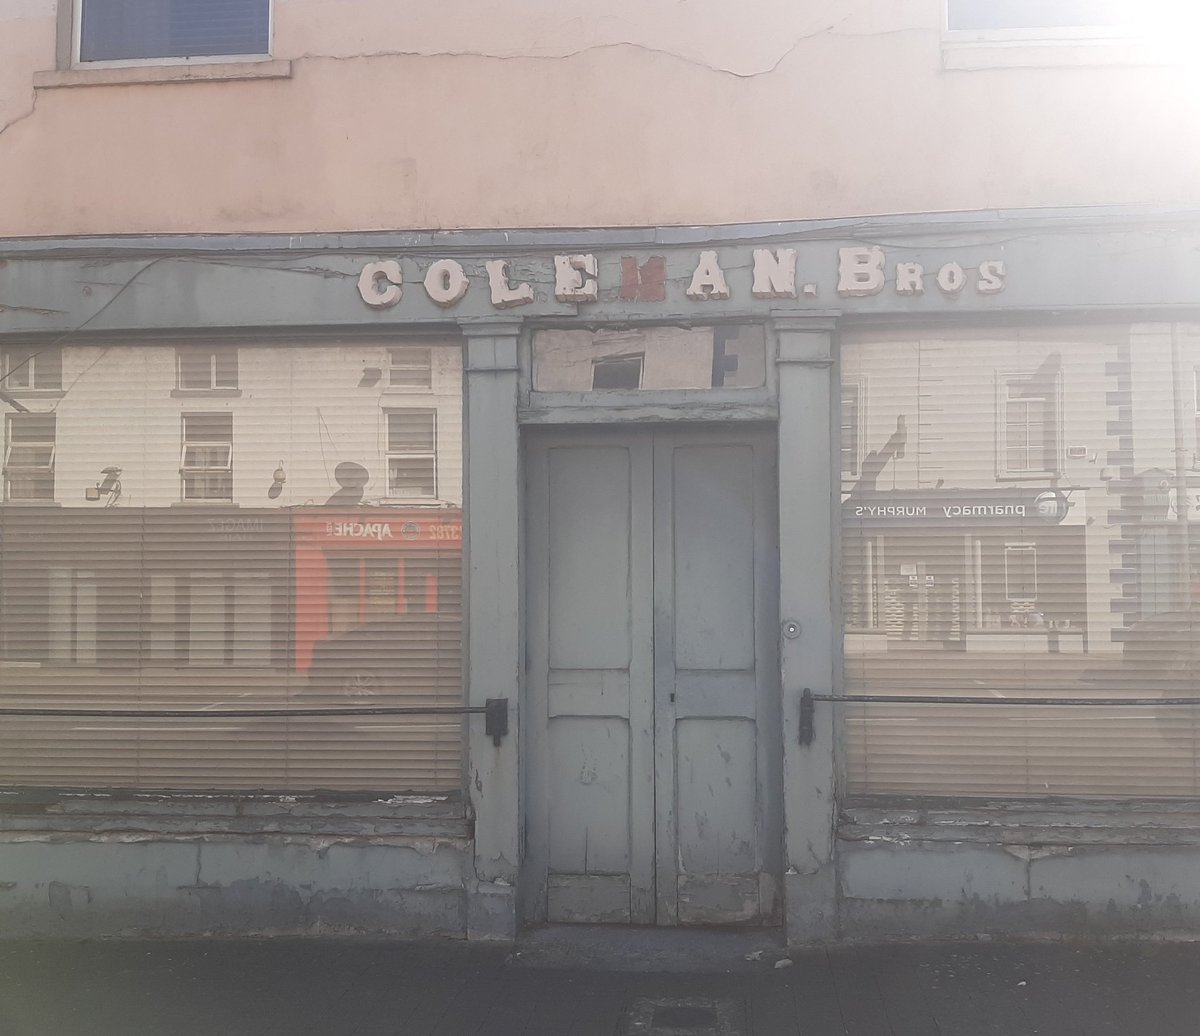 I came across these two beauties in Buttevant on my heritage travels. There are still many gems of shop and pub fronts like this all over the country, all worthy of conservation/restoration.